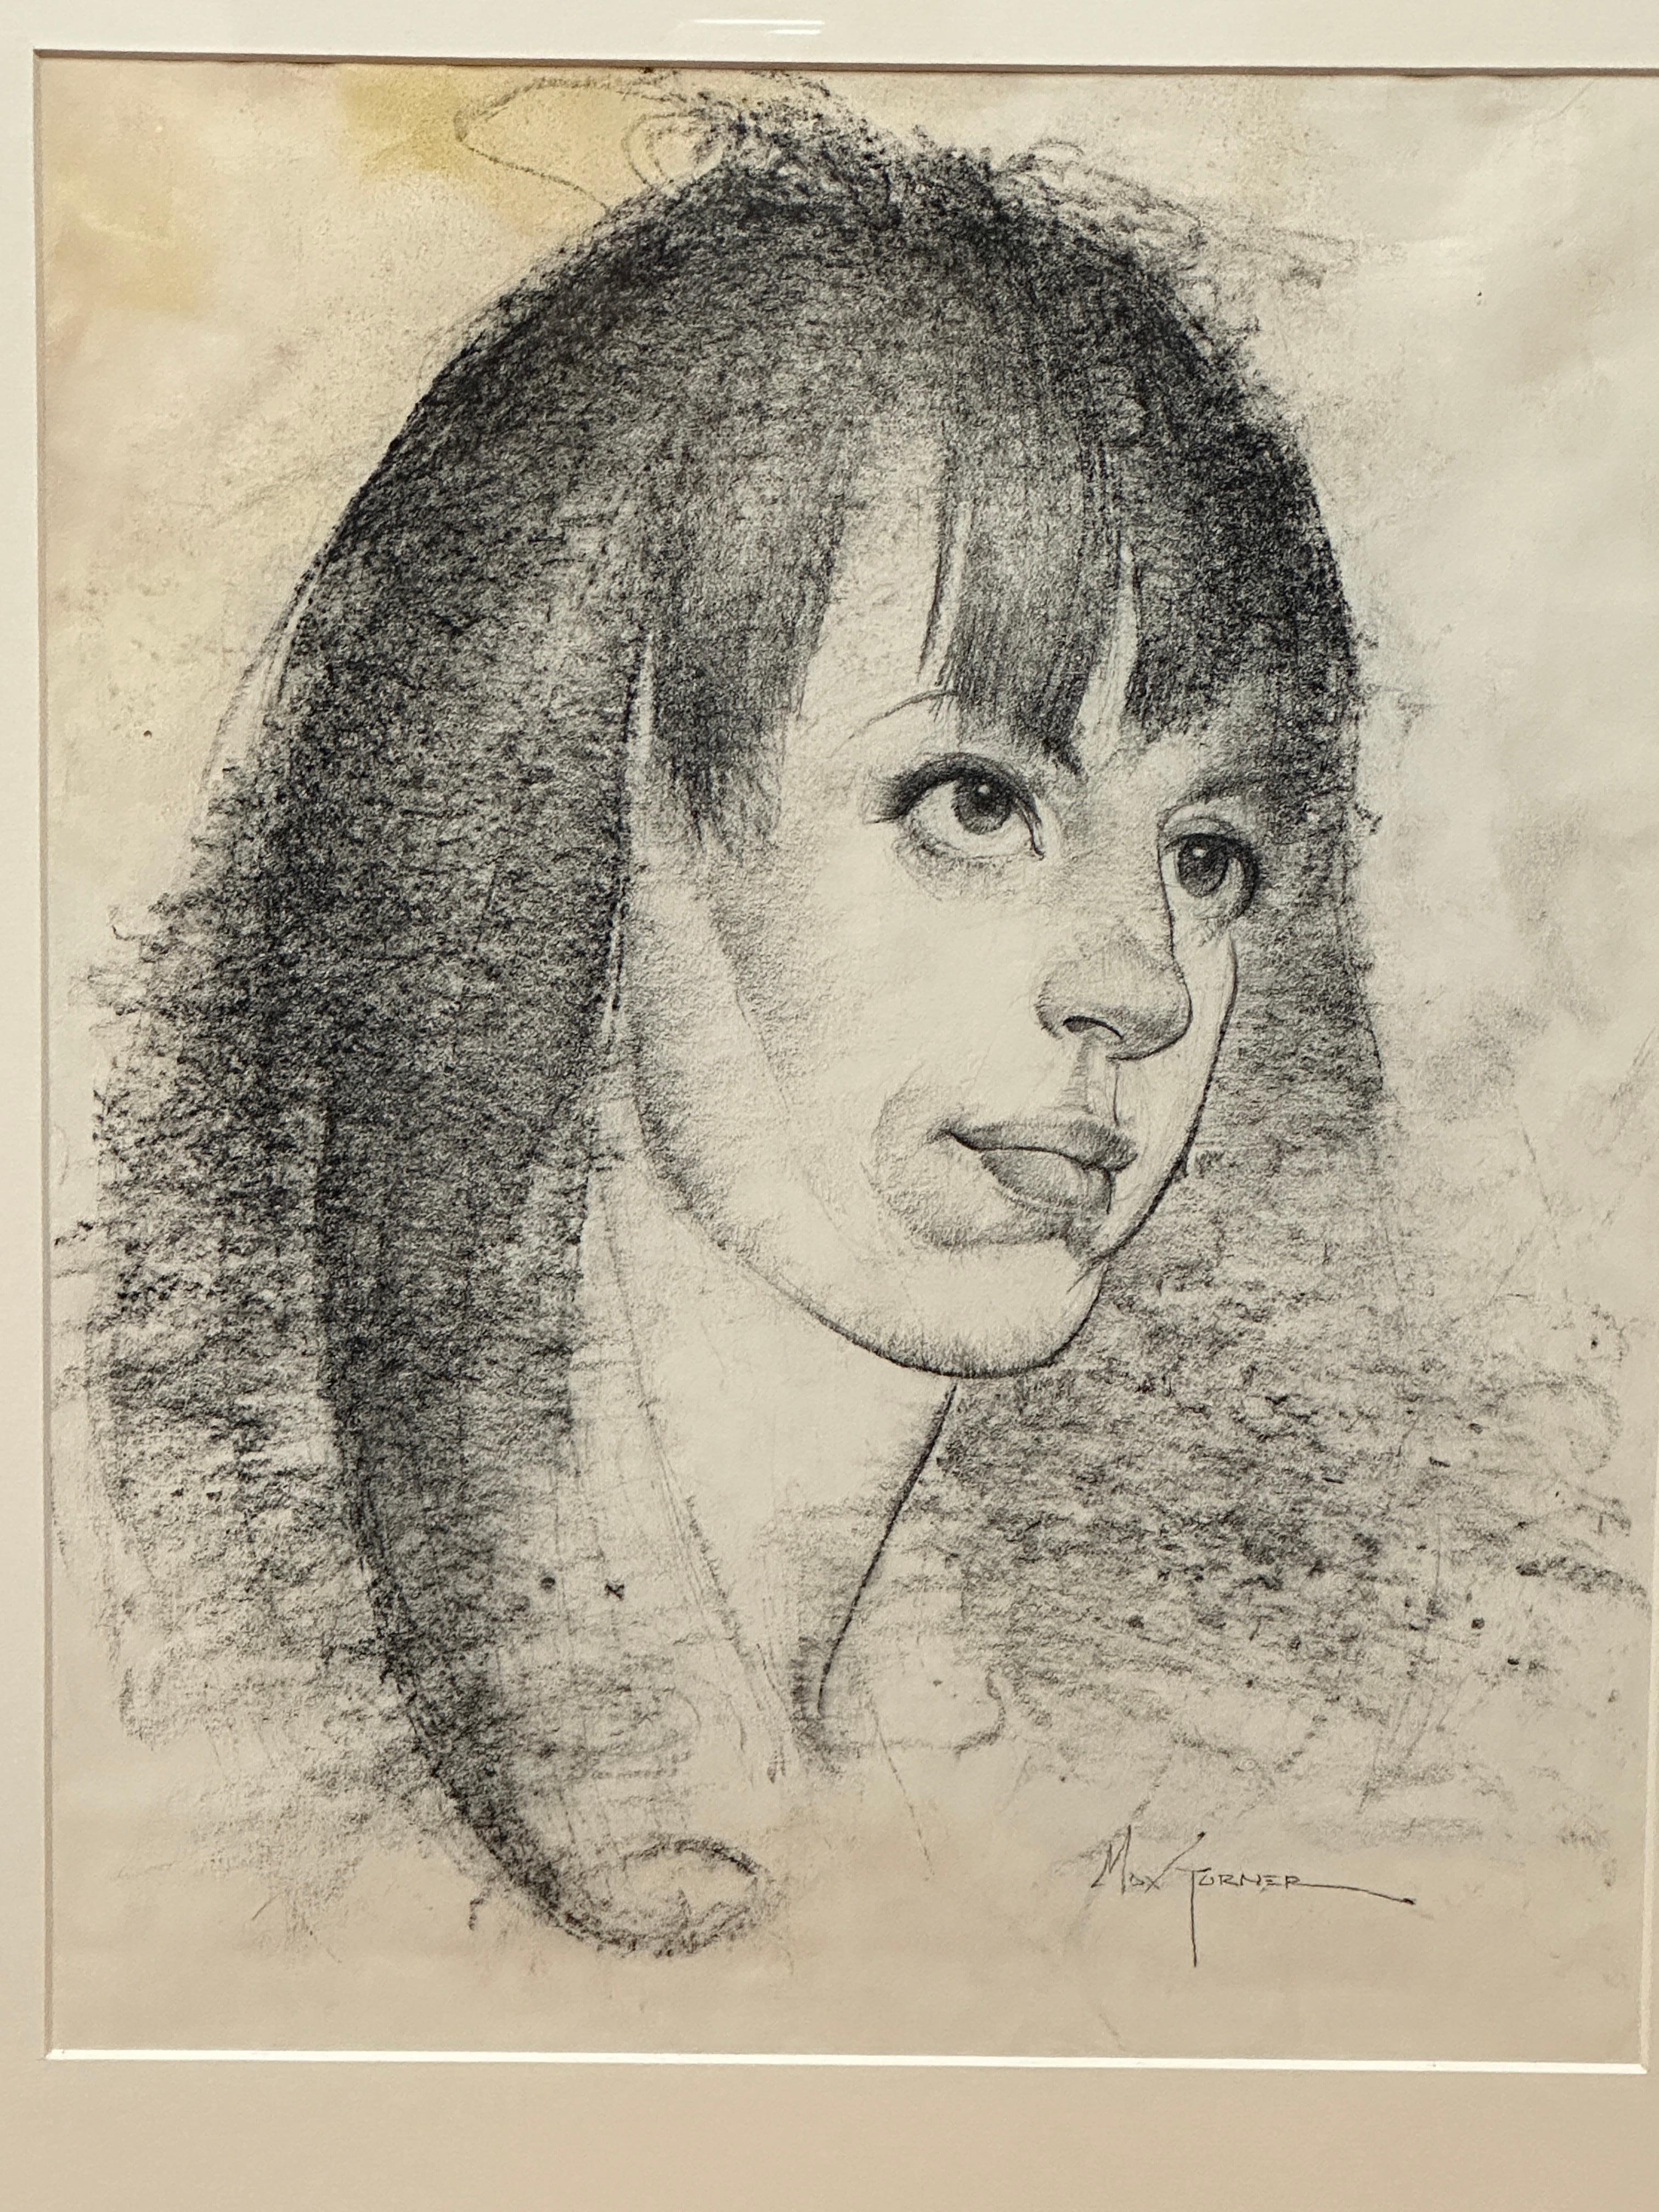 In this drawing, the background is deliberately neutral to accentuate the prominence of the face. Charcoal is a 